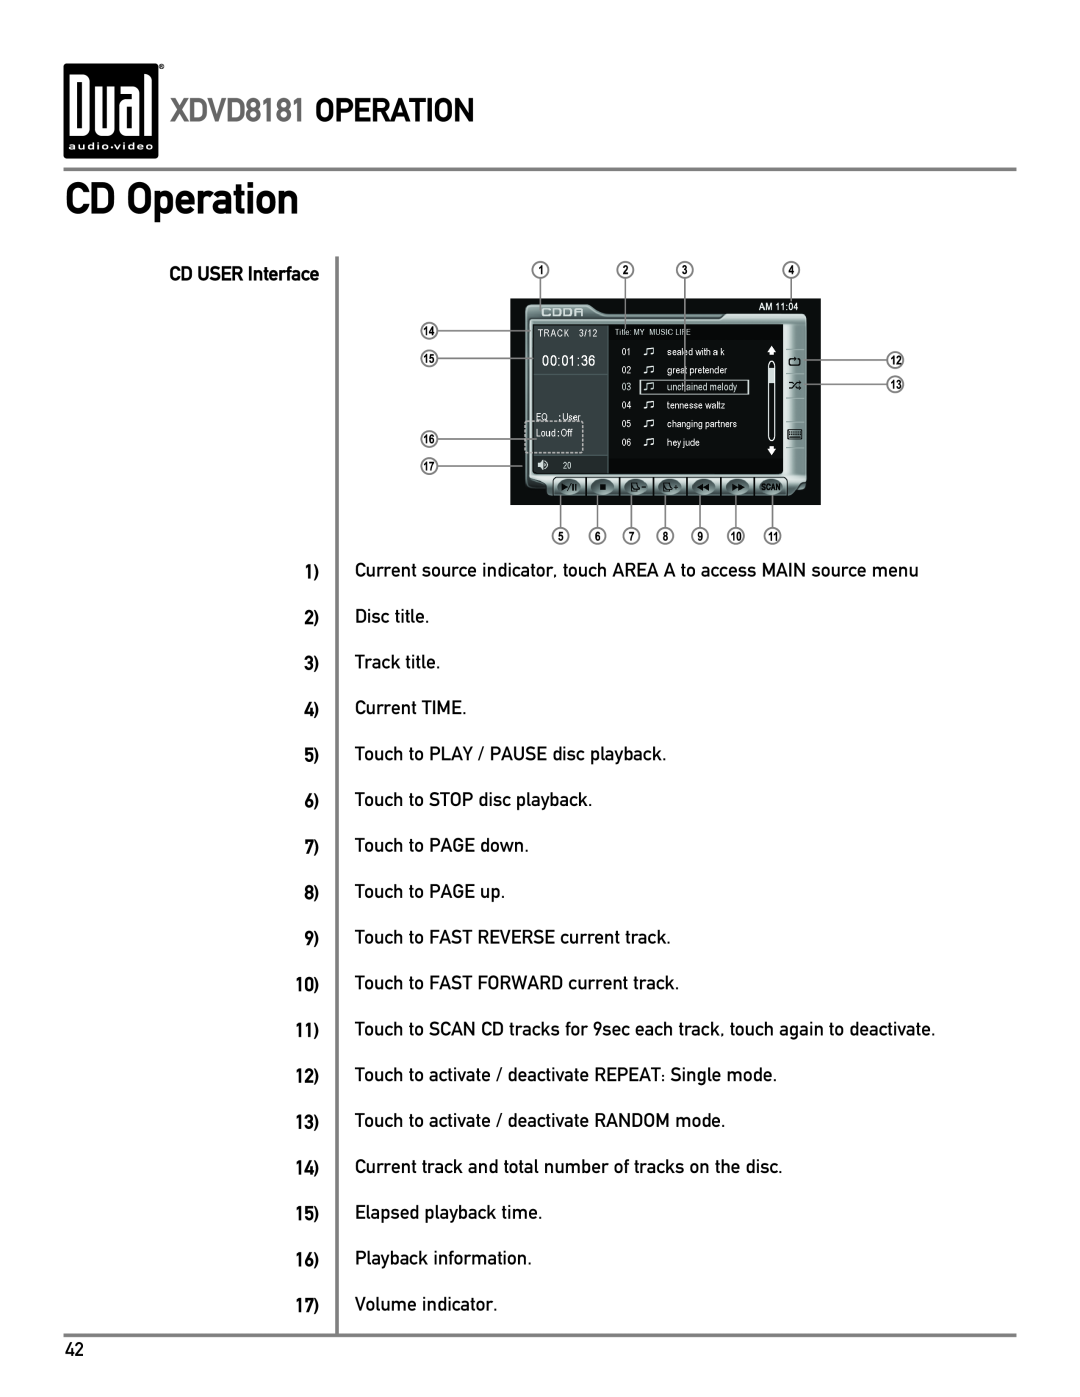 Dual owner manual CD Operation, XDVD8181 OPERATION, CD USER Interface 1 2 3 4 5 6 7 8 9 10 11 